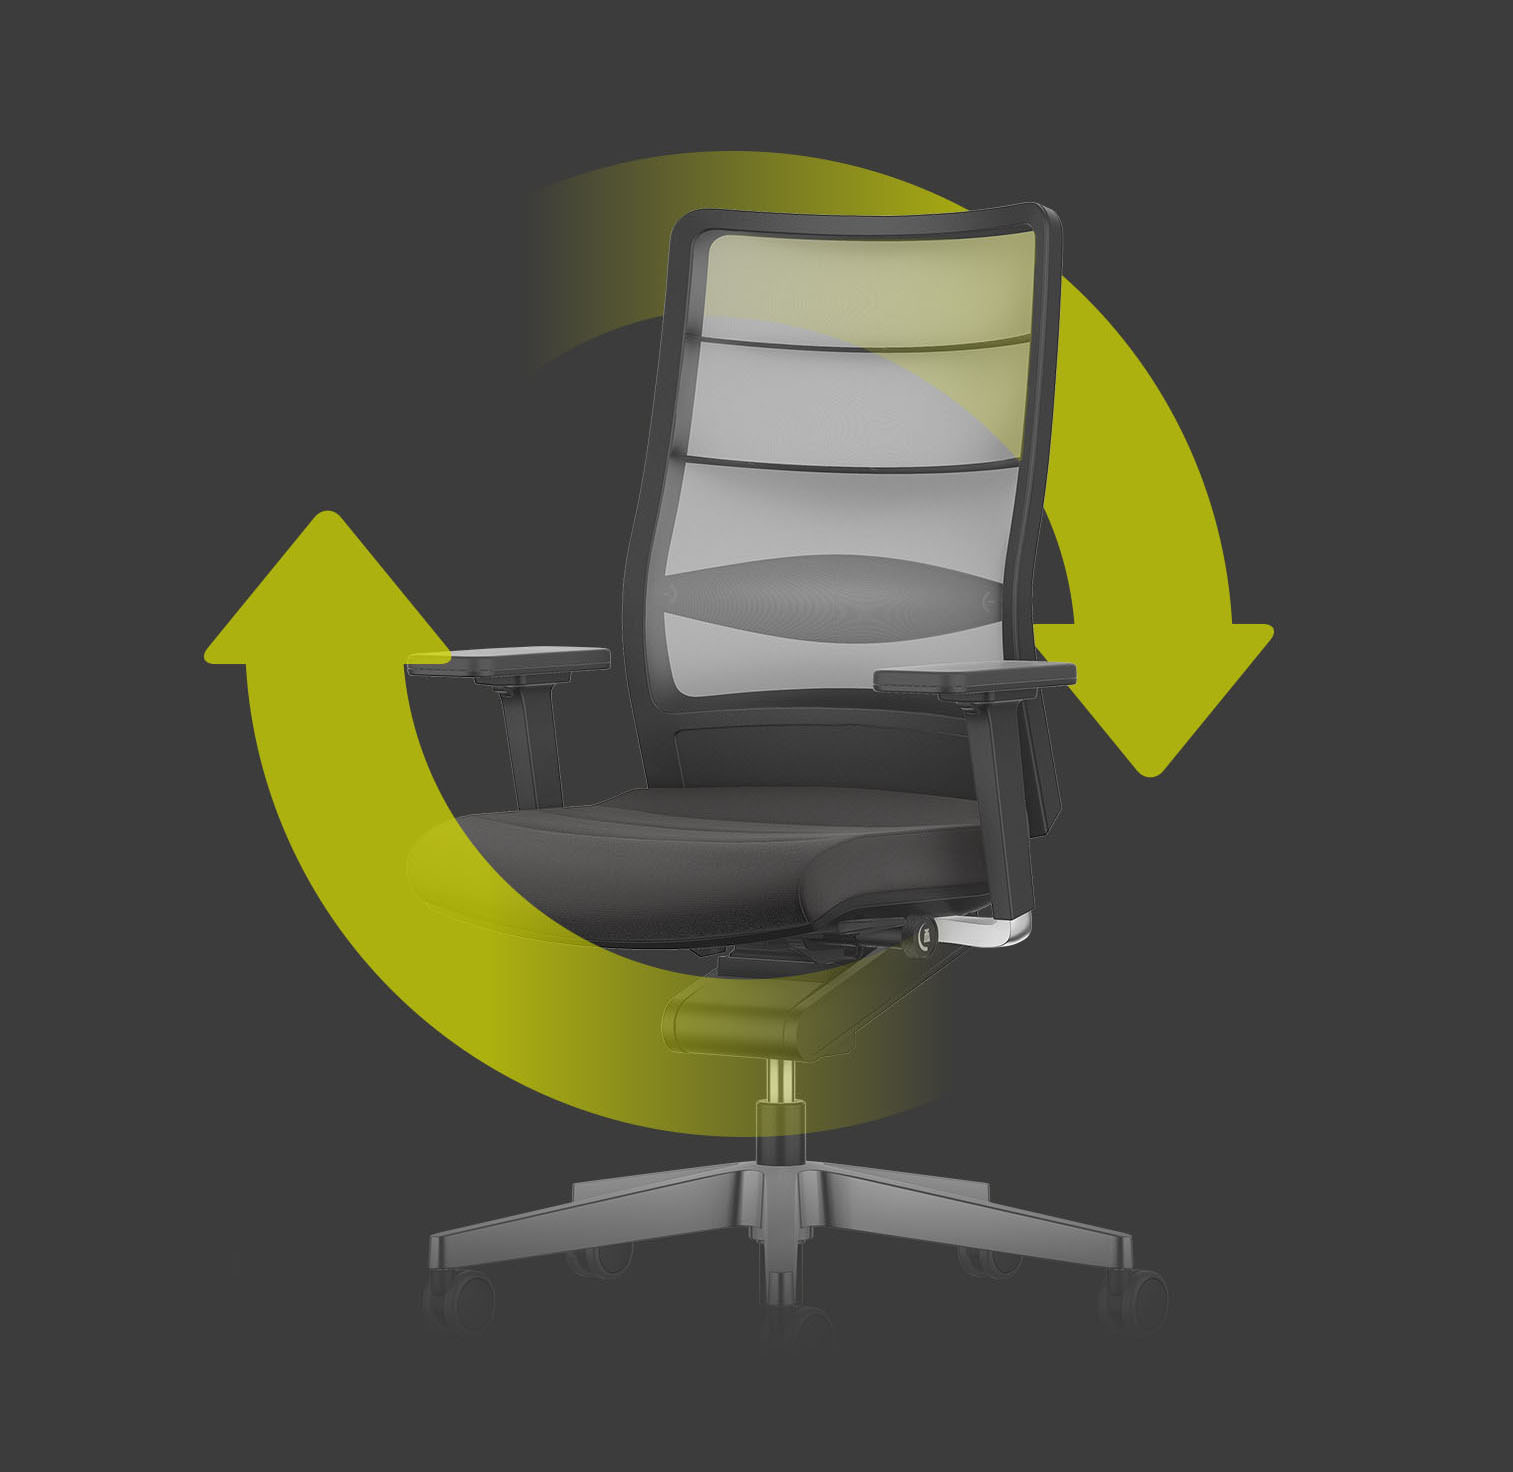 AirPad office swivel chair in black with light-coloured mesh backrest with two green arrows forming a circle around the chair. These indicate the sustainability and reusability of the chair.